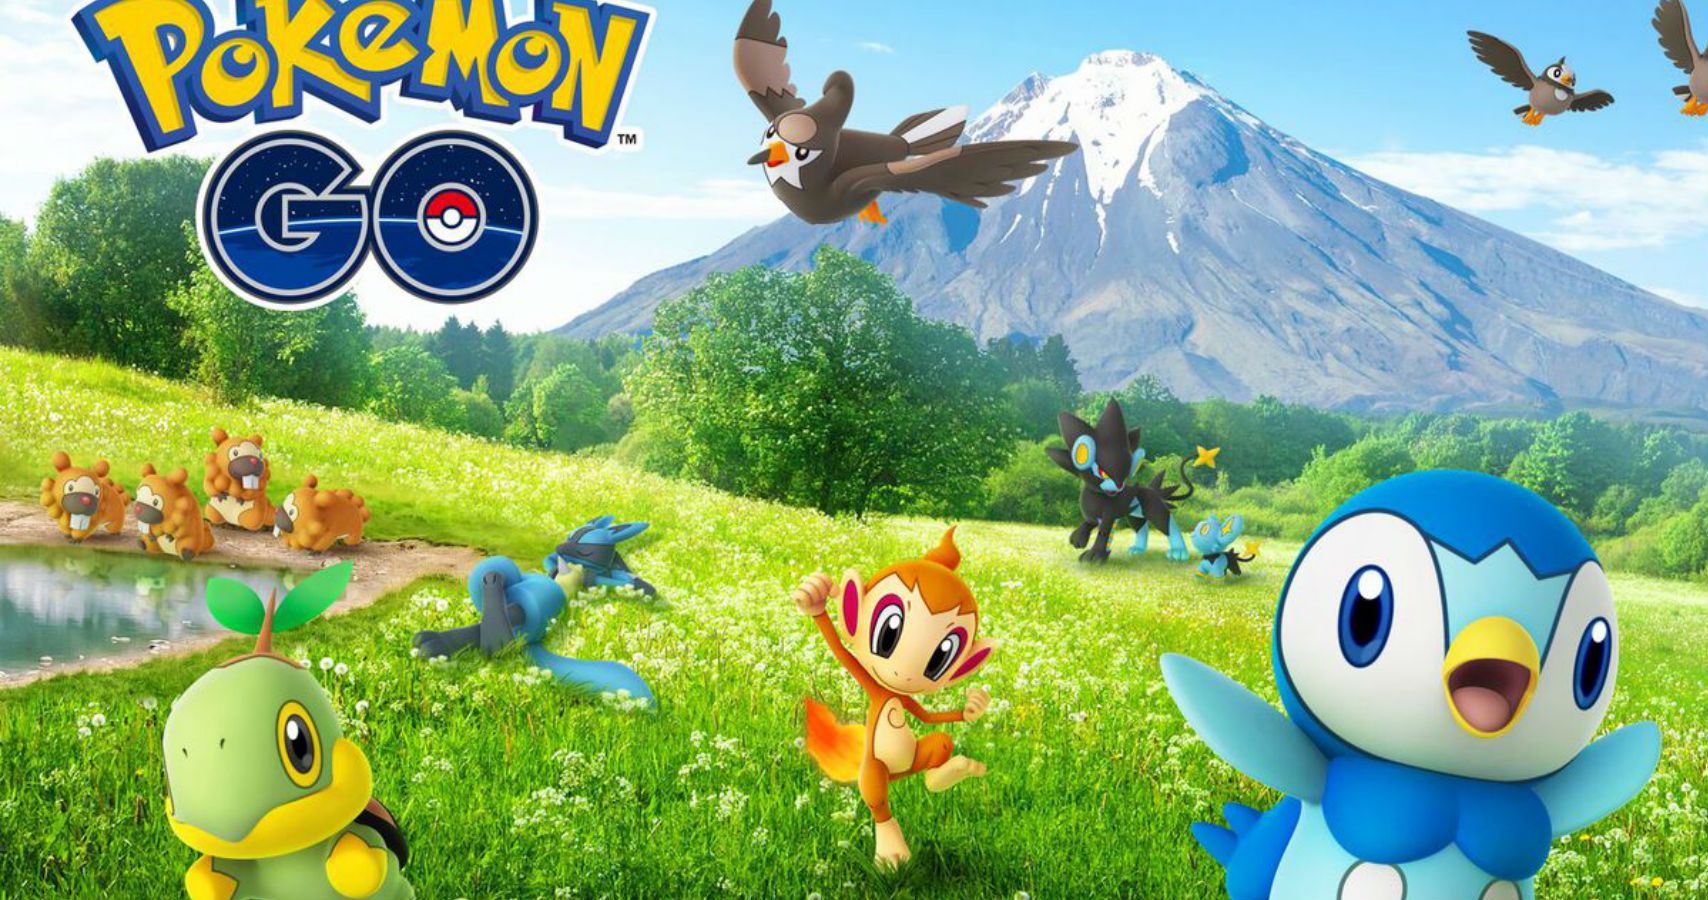 In One Year Pokémon Go Has Added Weather Gen 3 & 4 Quests Friends Trading And Now PvP